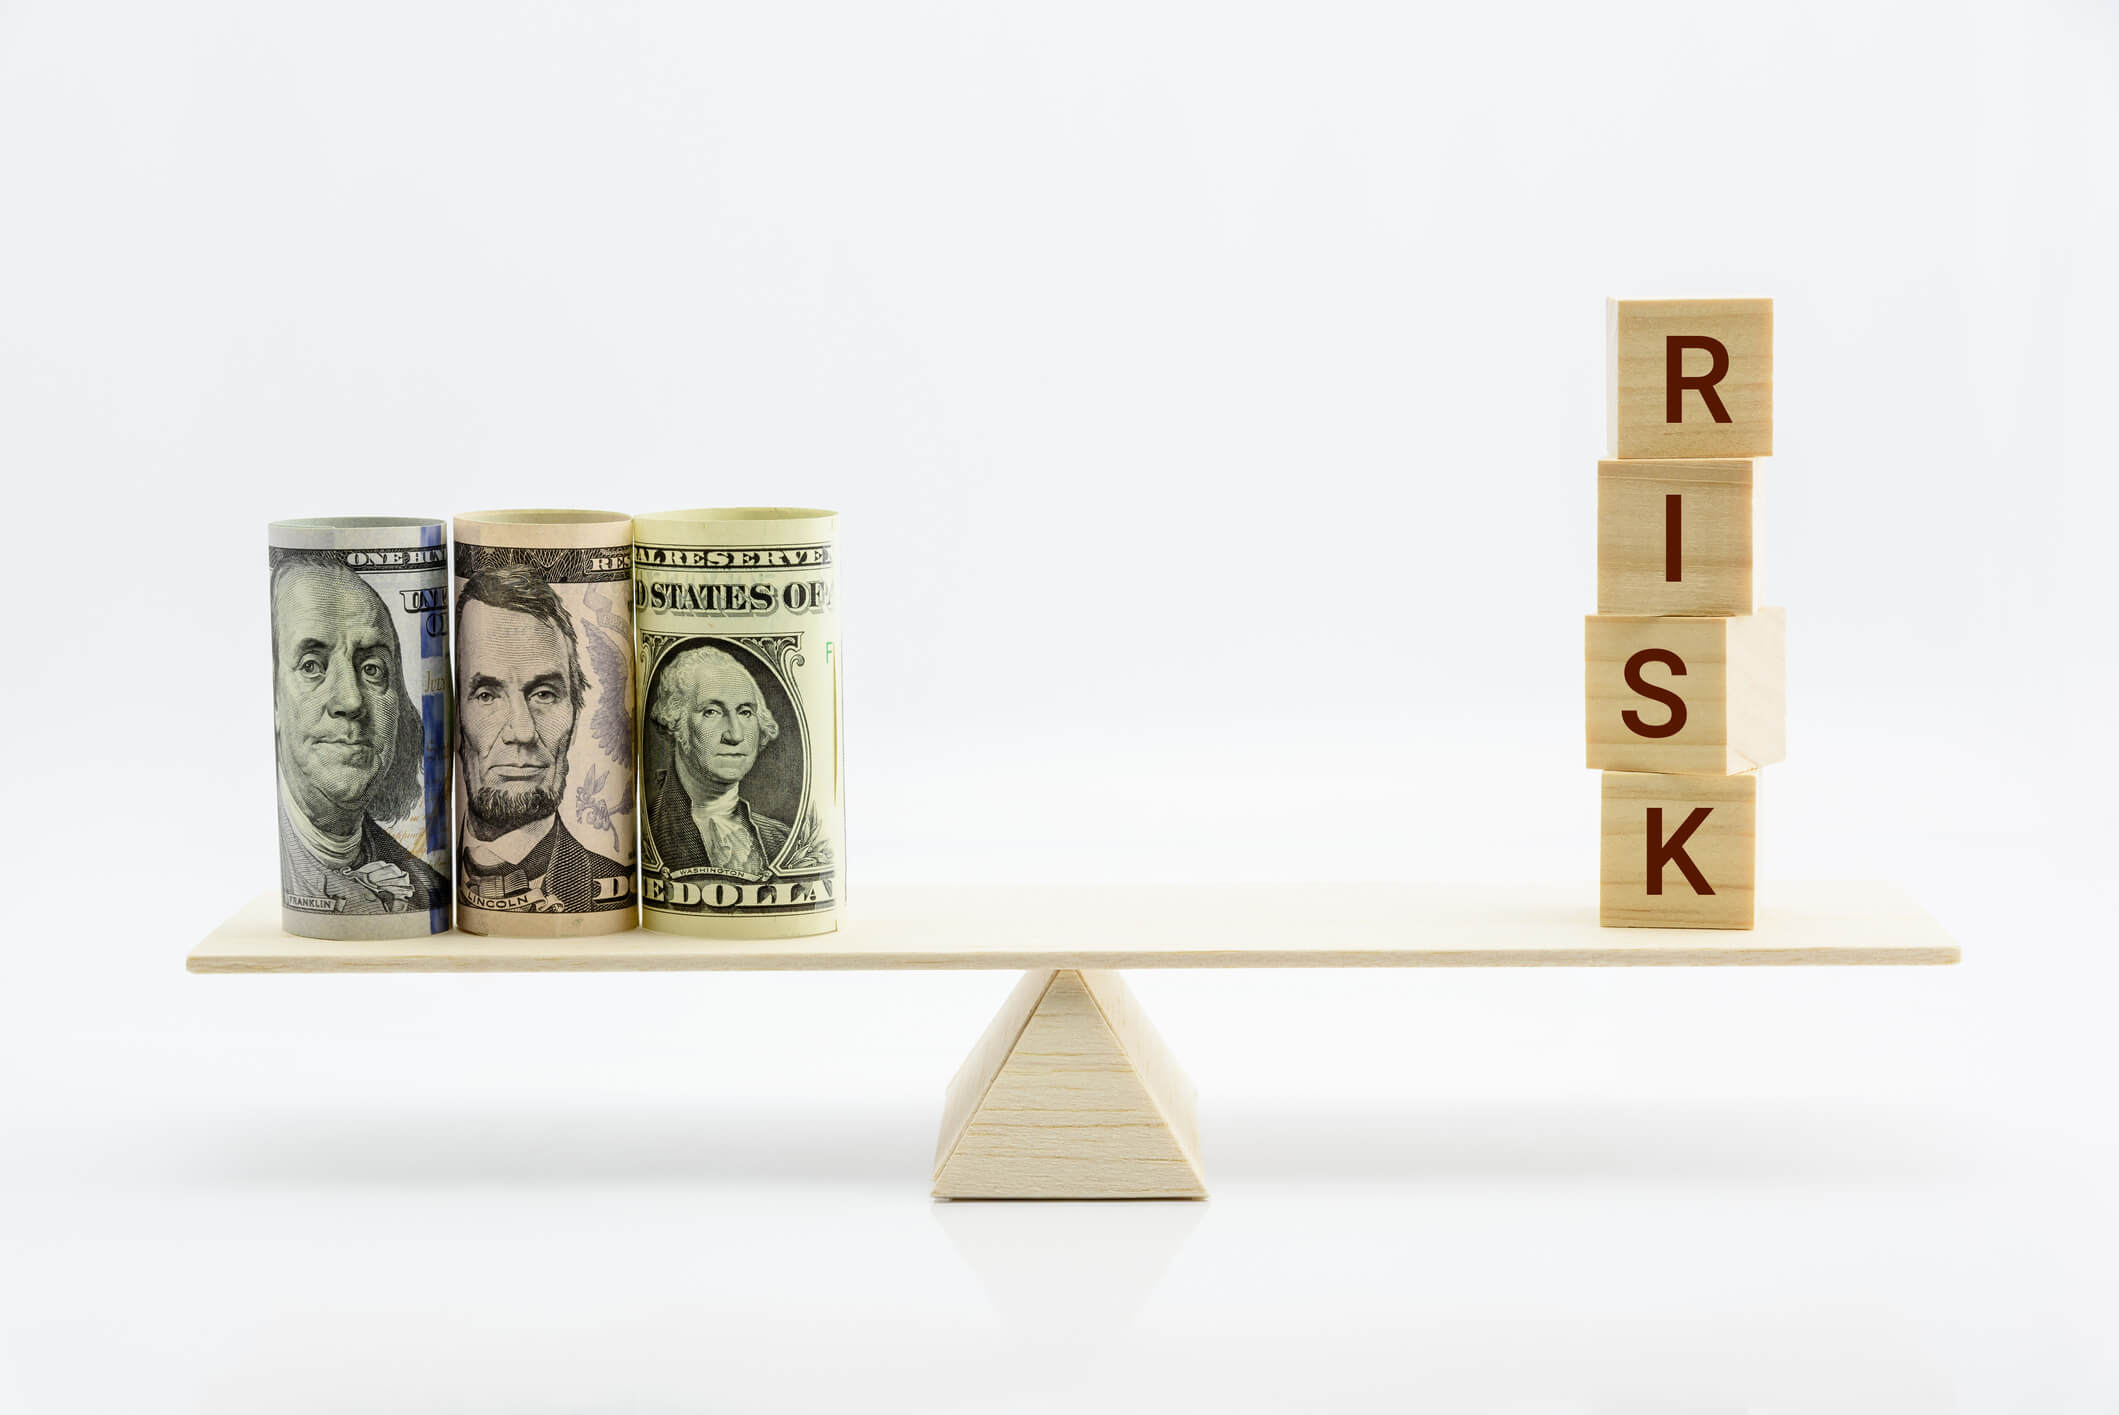 High Investment Risks - Complete Controller